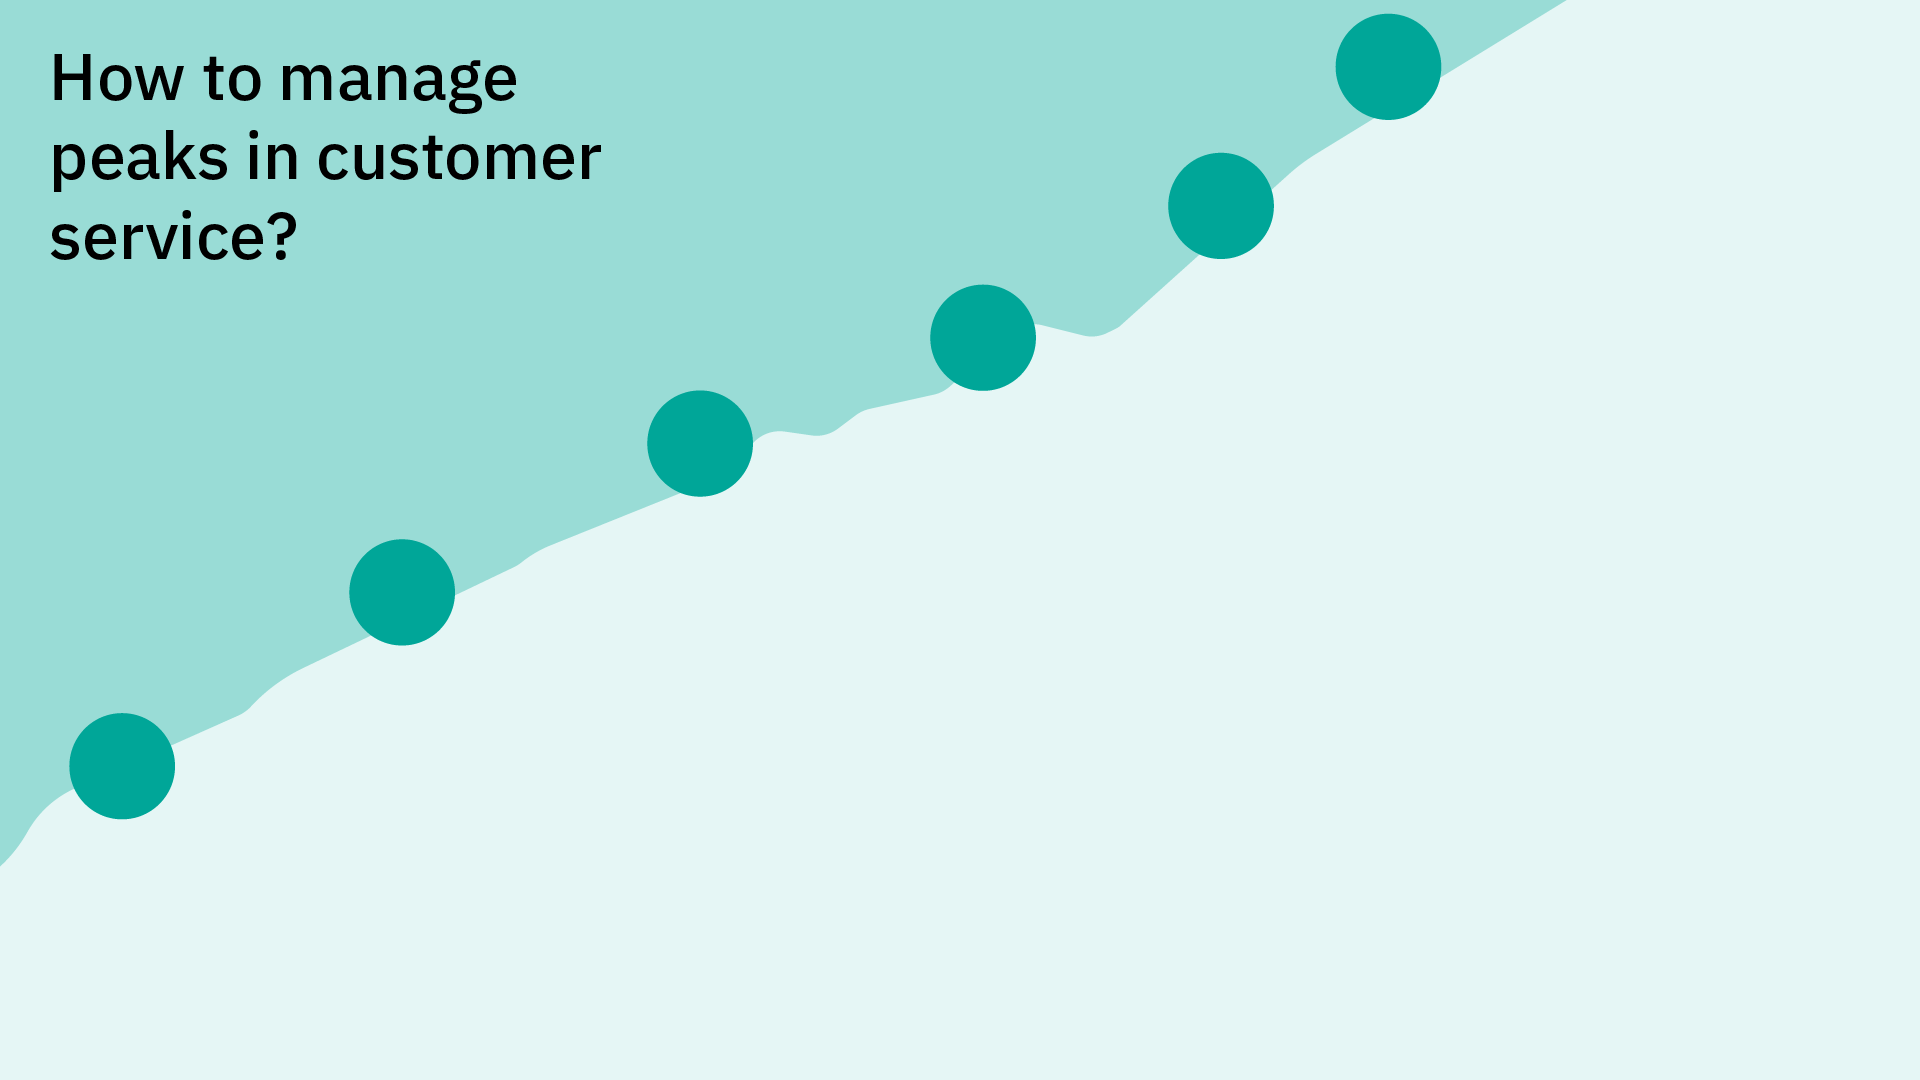 How to manage peaks in customer service